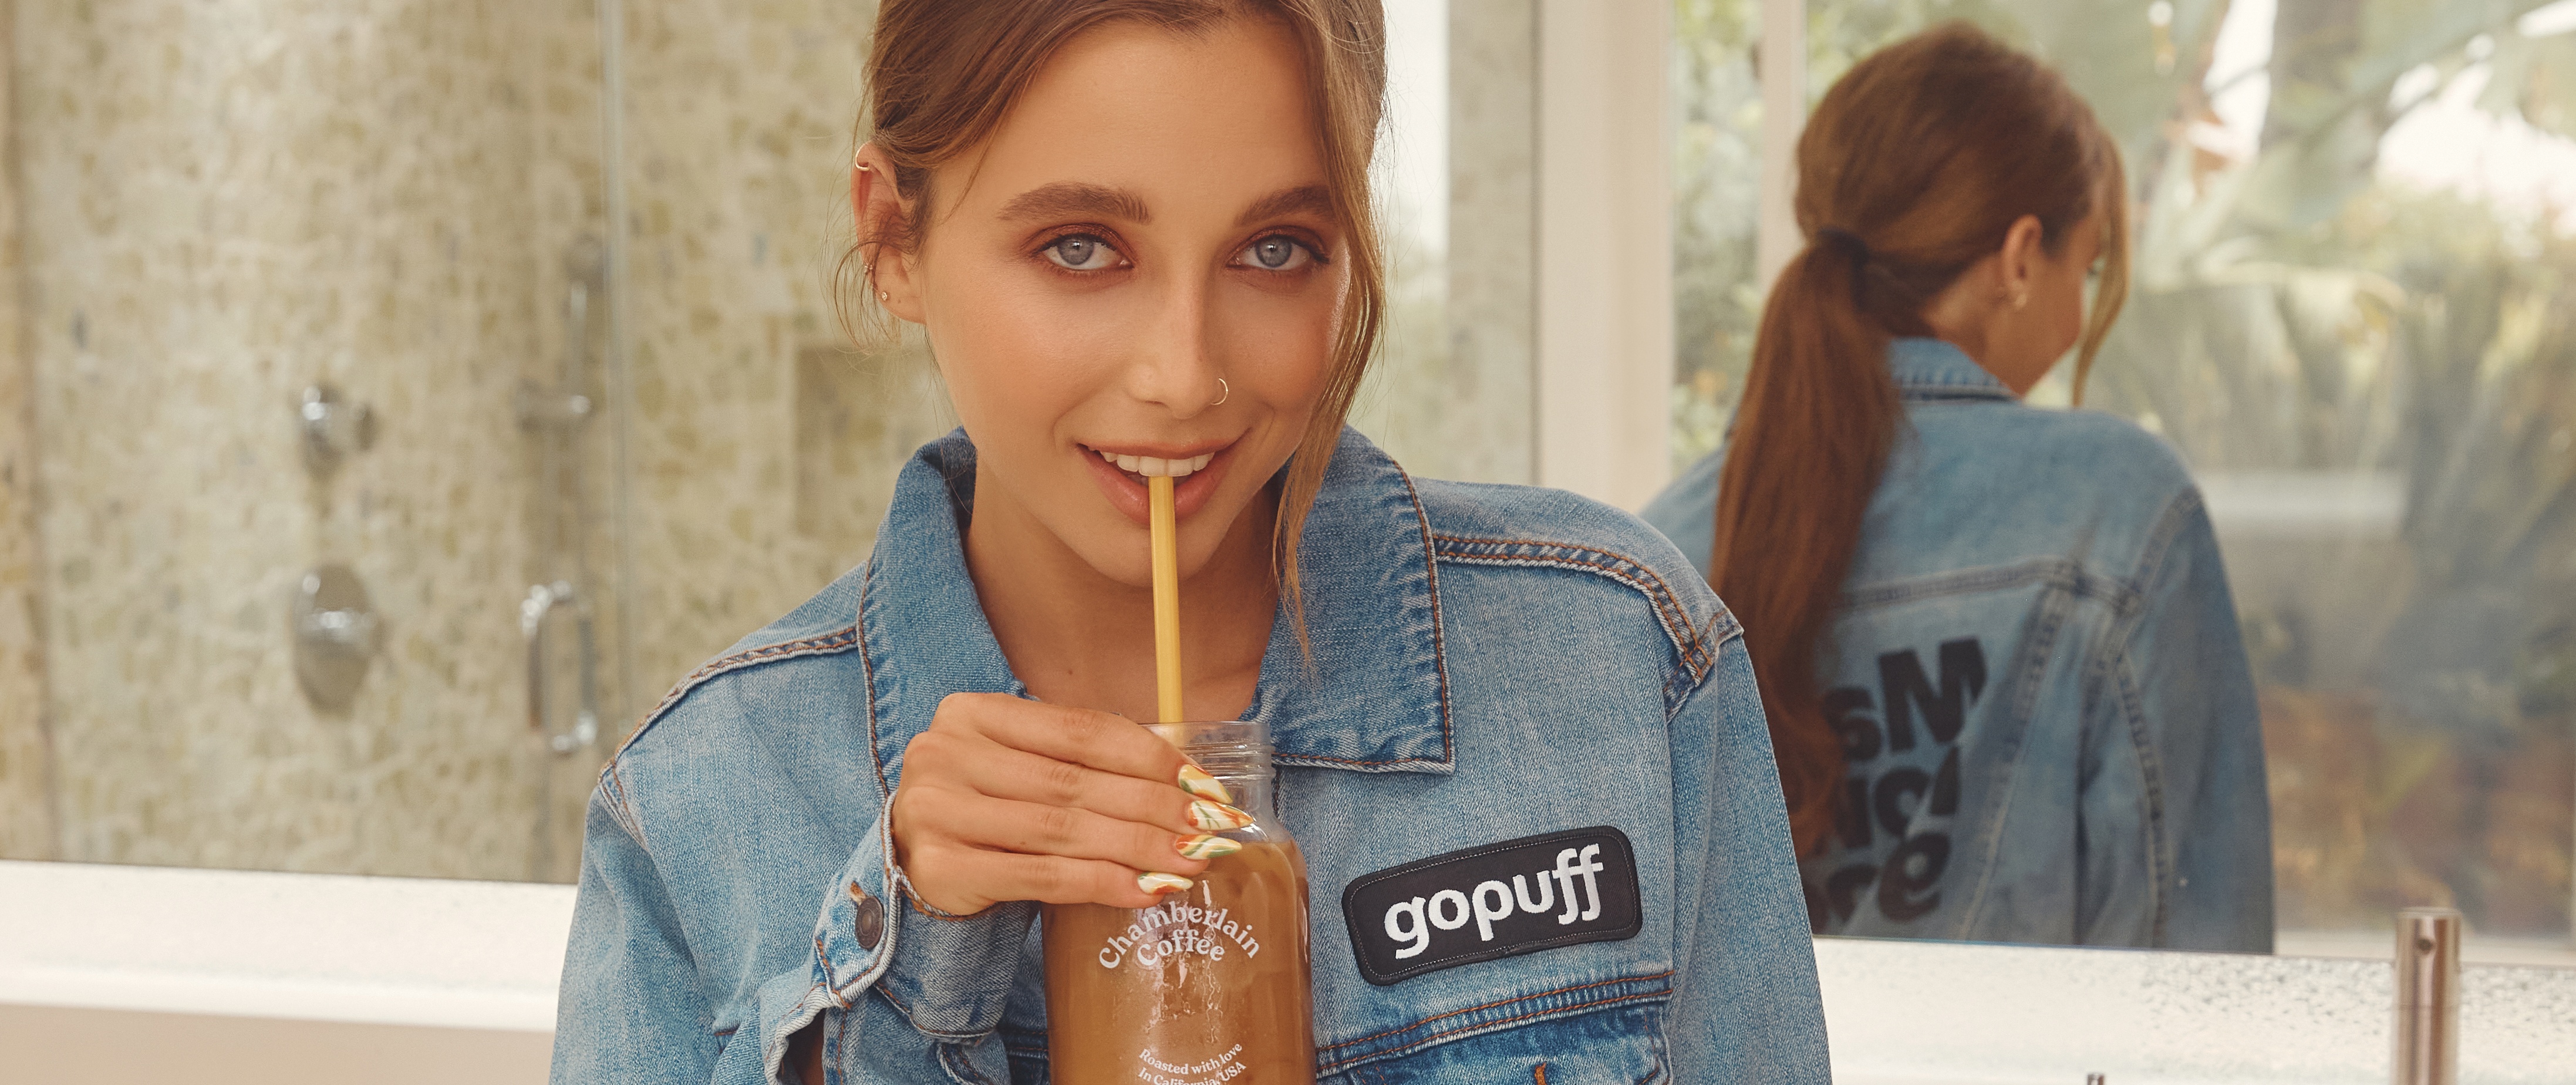 Chamberlain Coffee Feels Like An Extension Of Myself':  Influencer Emma  Chamberlain Founded Coffee Company Closes $7 Million Series A Funding